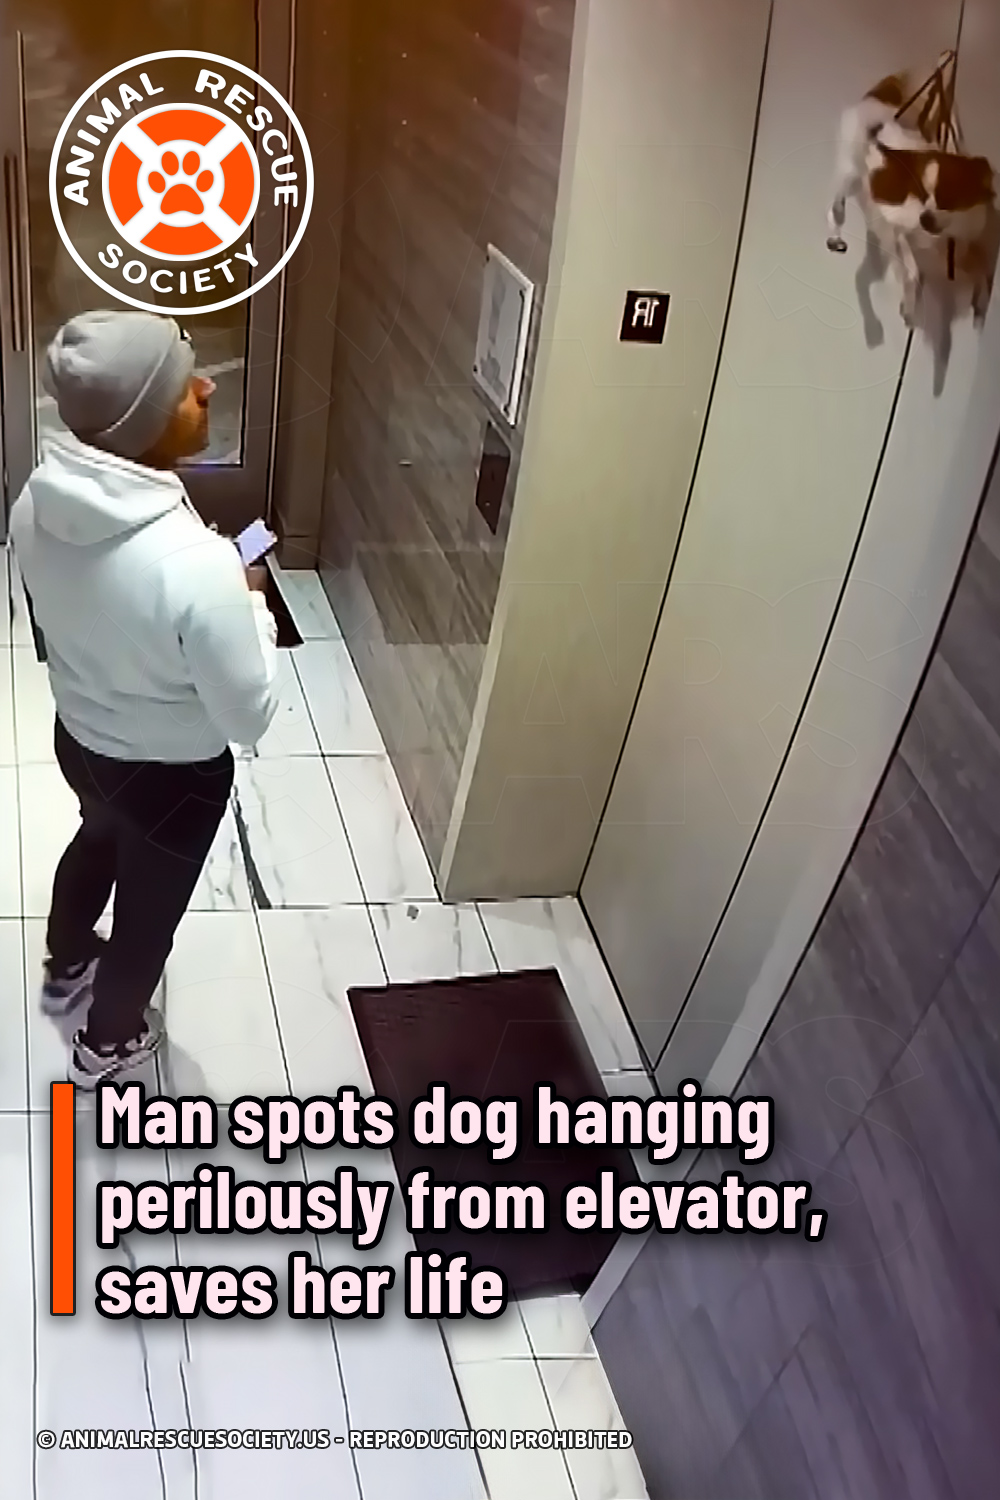 Man spots dog hanging perilously from elevator, saves her life